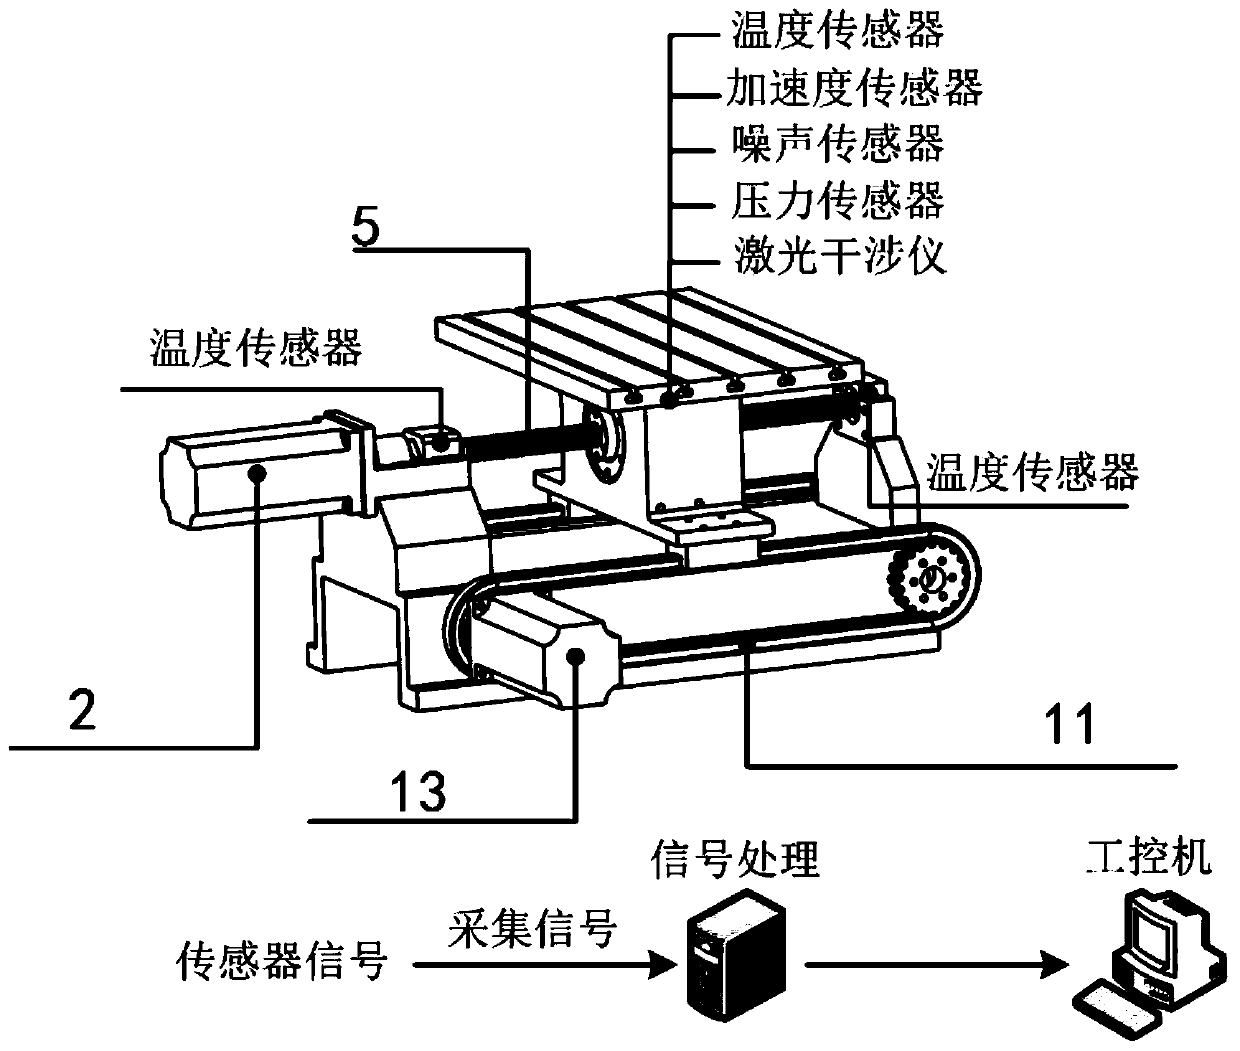 A crawler rail drive micro-feed servo system and synchronous control method